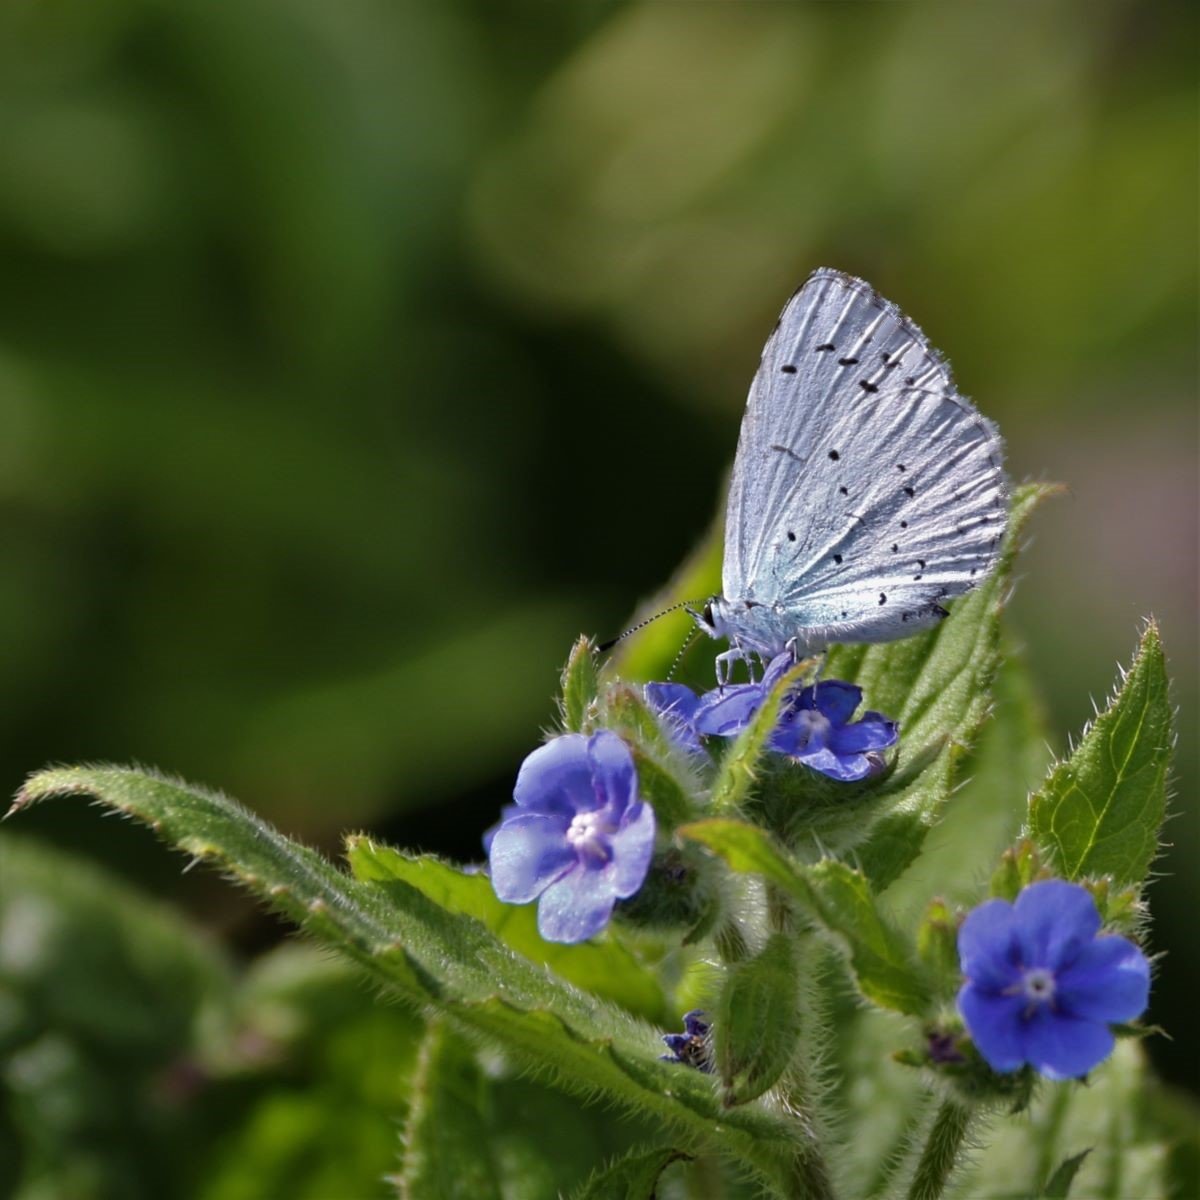 The Dainty Holly Blue by Margaret Robson